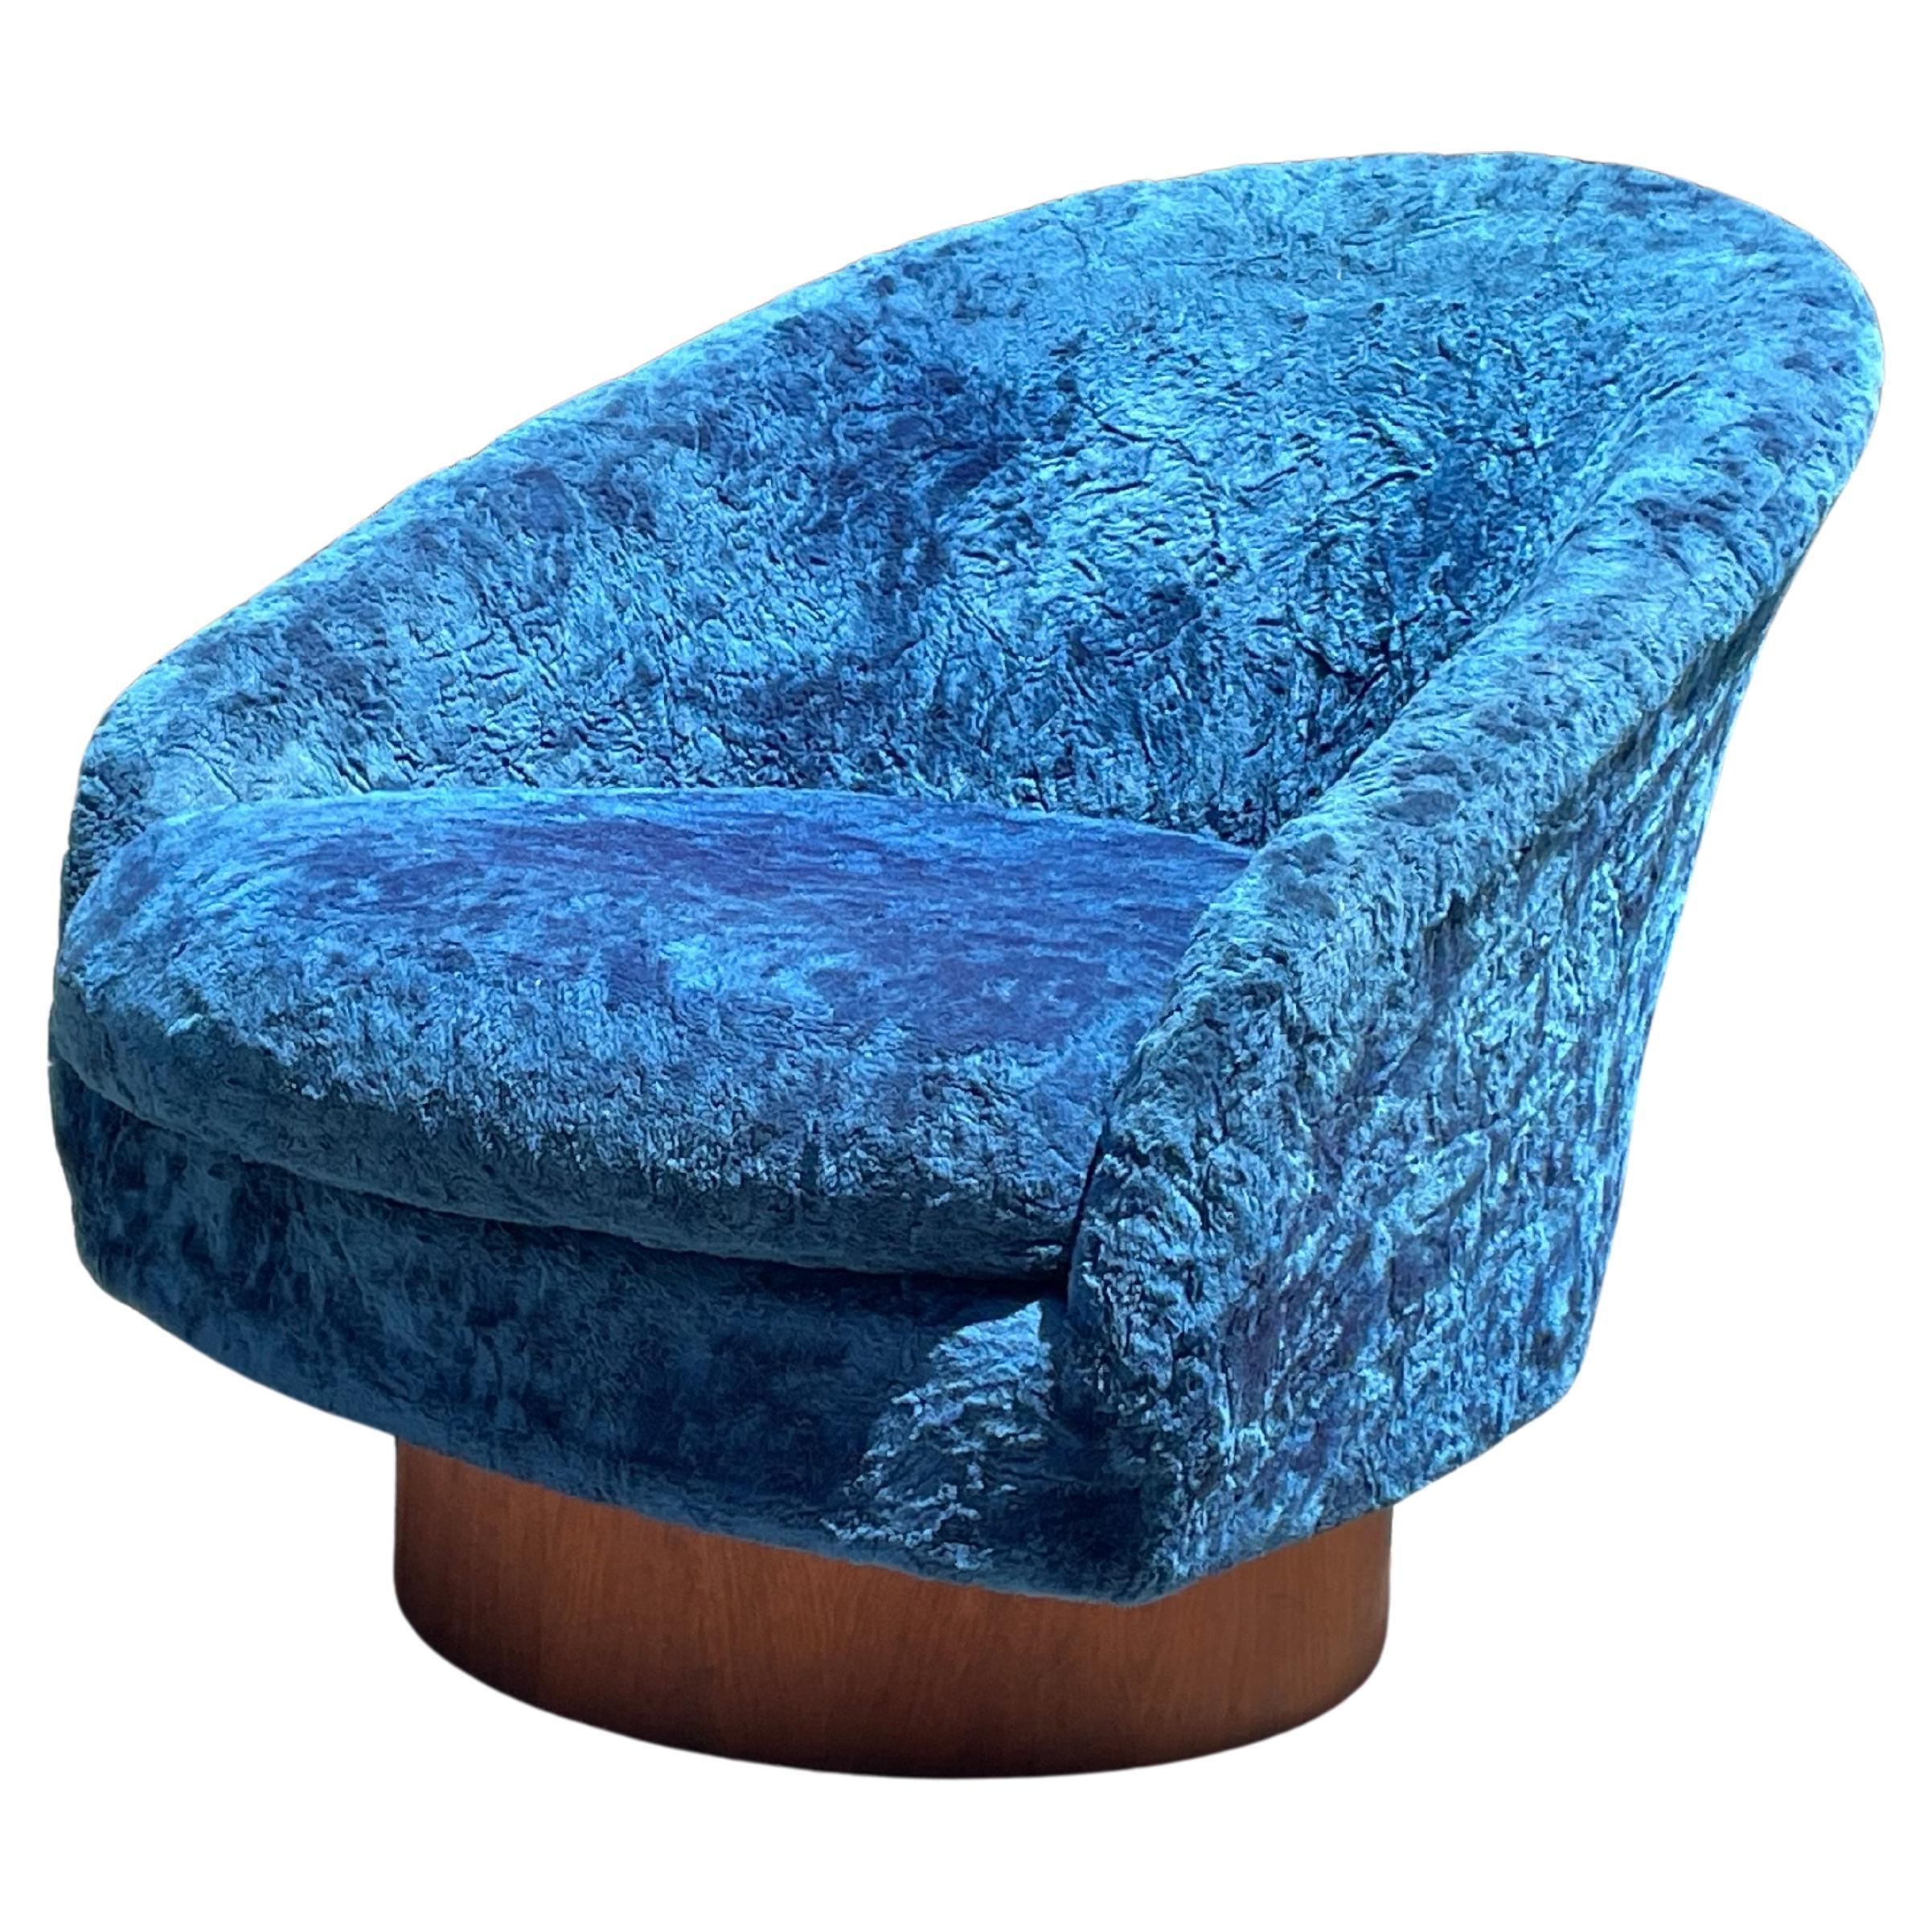 All original magnificent mid-century Adrian Pearsall swivel lounge chair with in blue velvet. The chairs features a swivel rocker walnut base. Super comfortable. Swivel and rock. USA, 1970s.

Great lines on this chair.

Very good original vintage